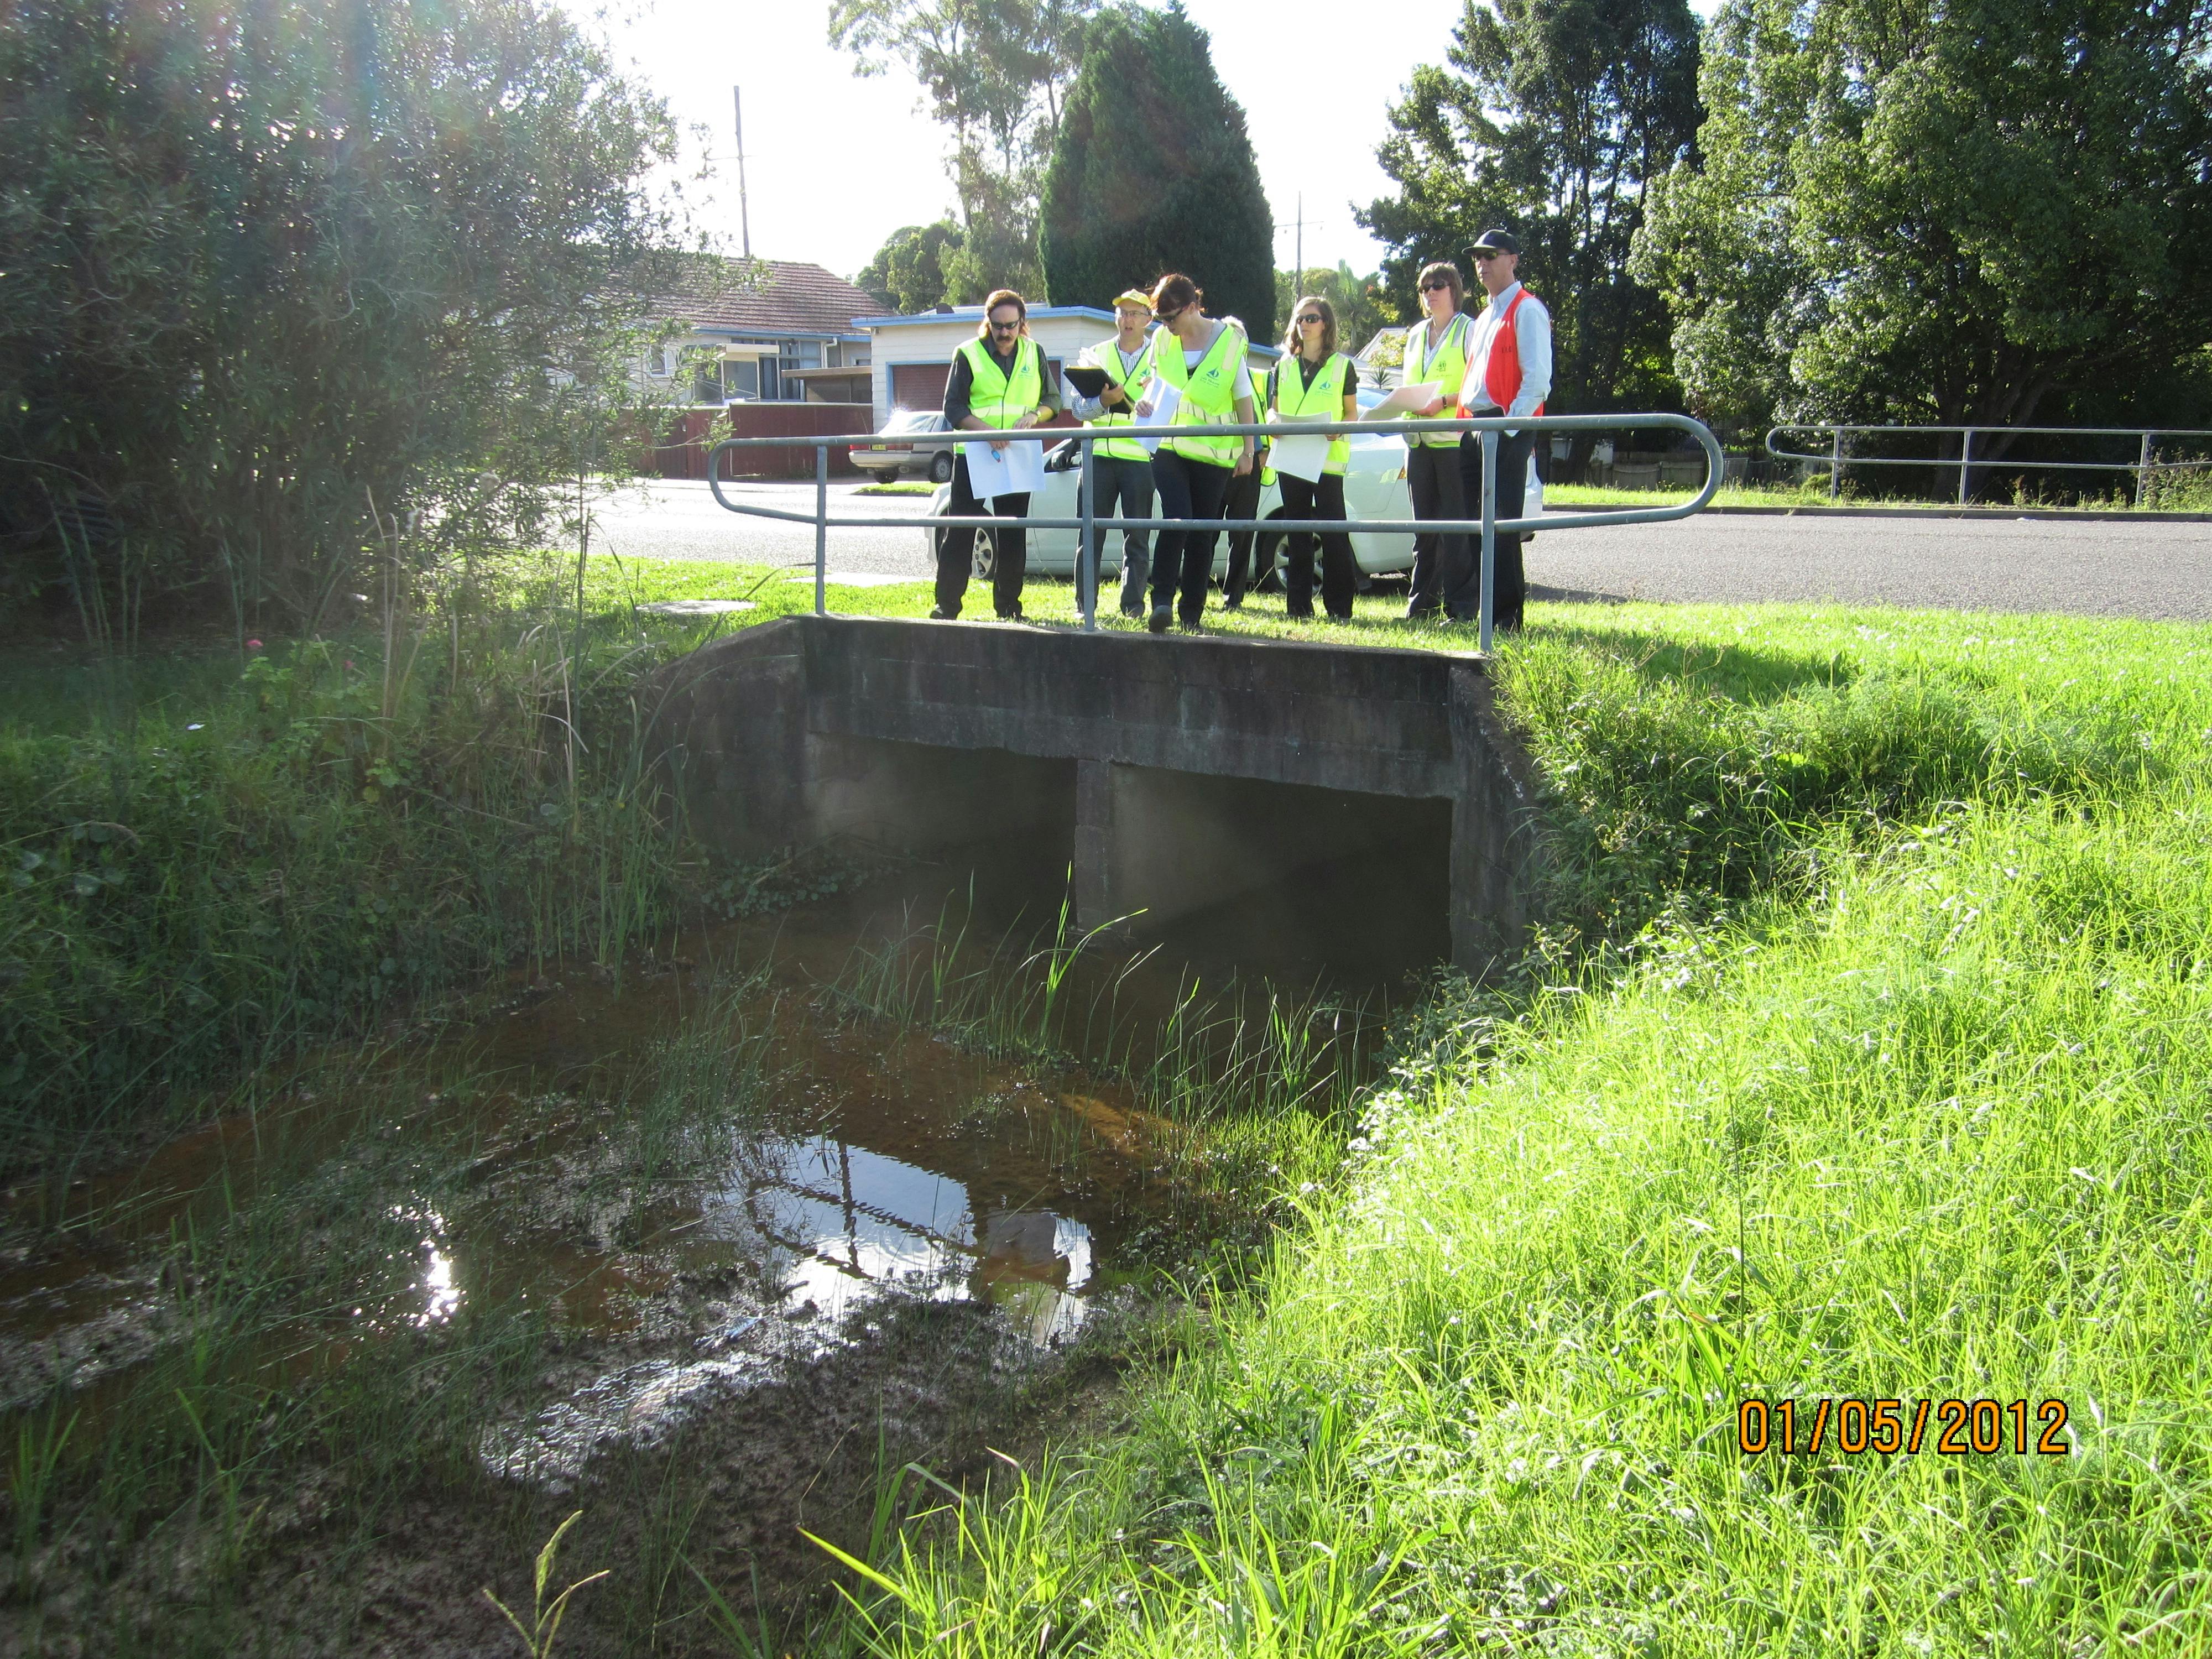 Inspection by Council, Hunter Water and WMAwater staff